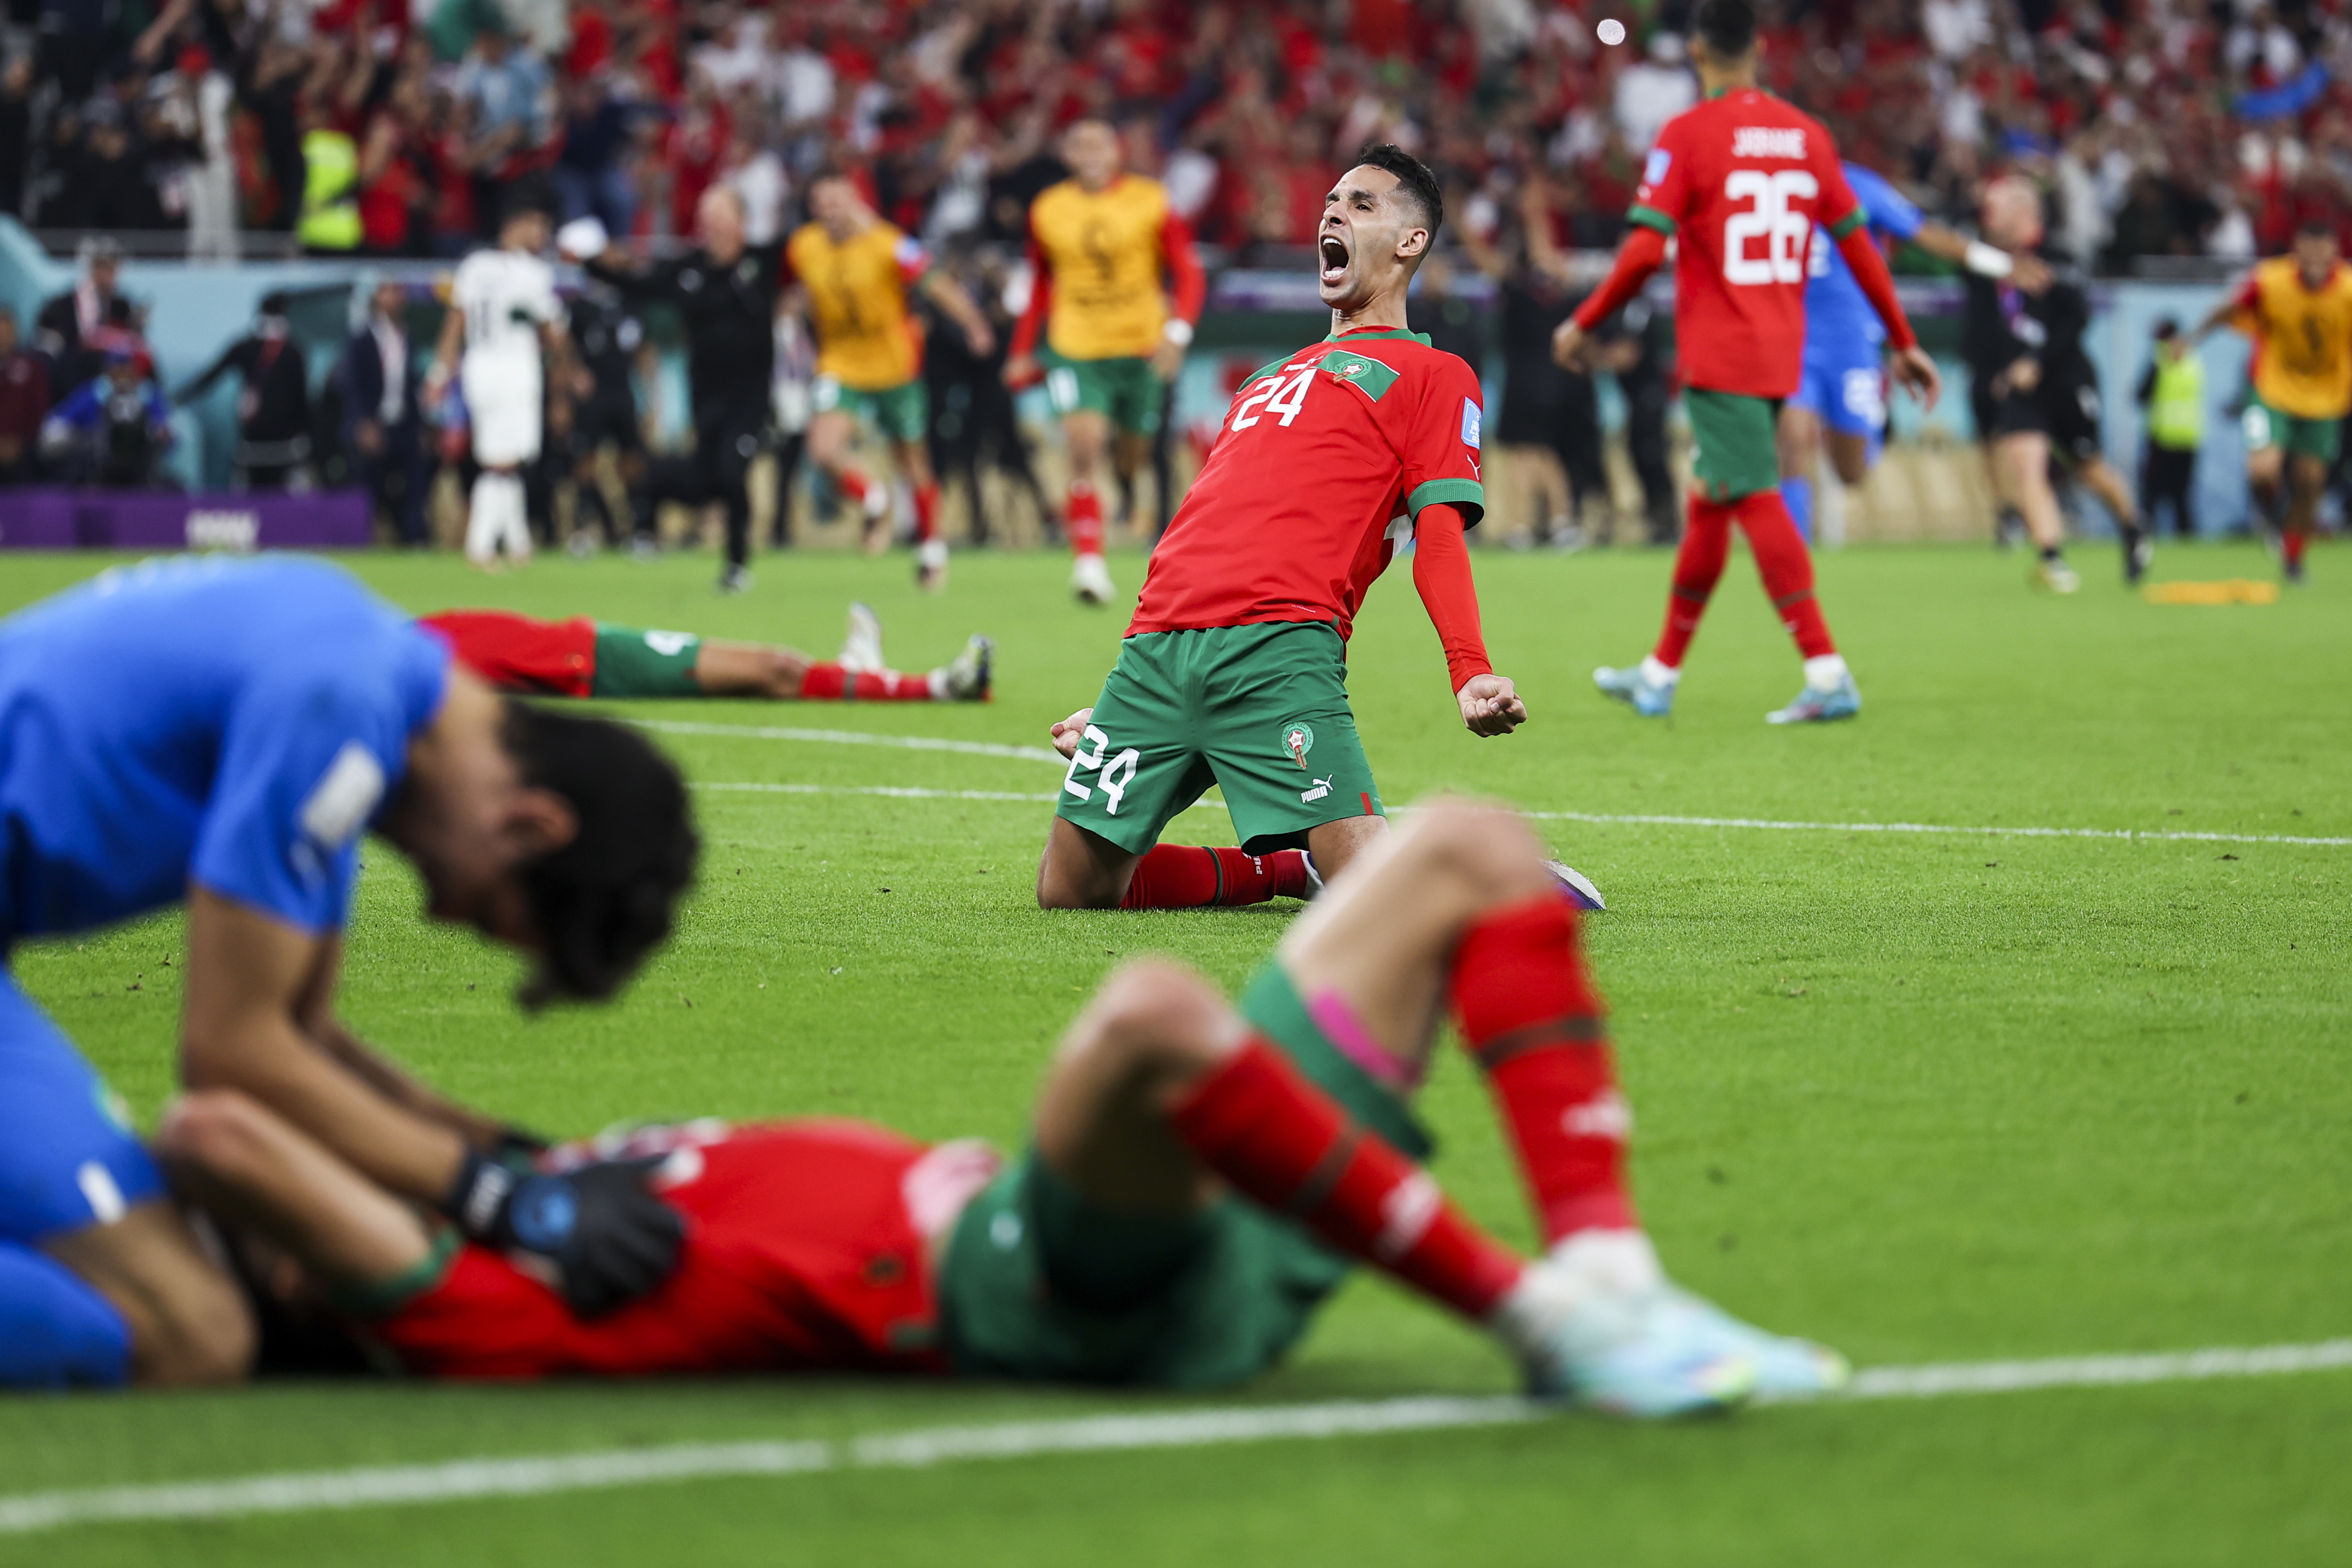 Historic Pass For Morocco To The Semifinals By Beating Portugal 1-0